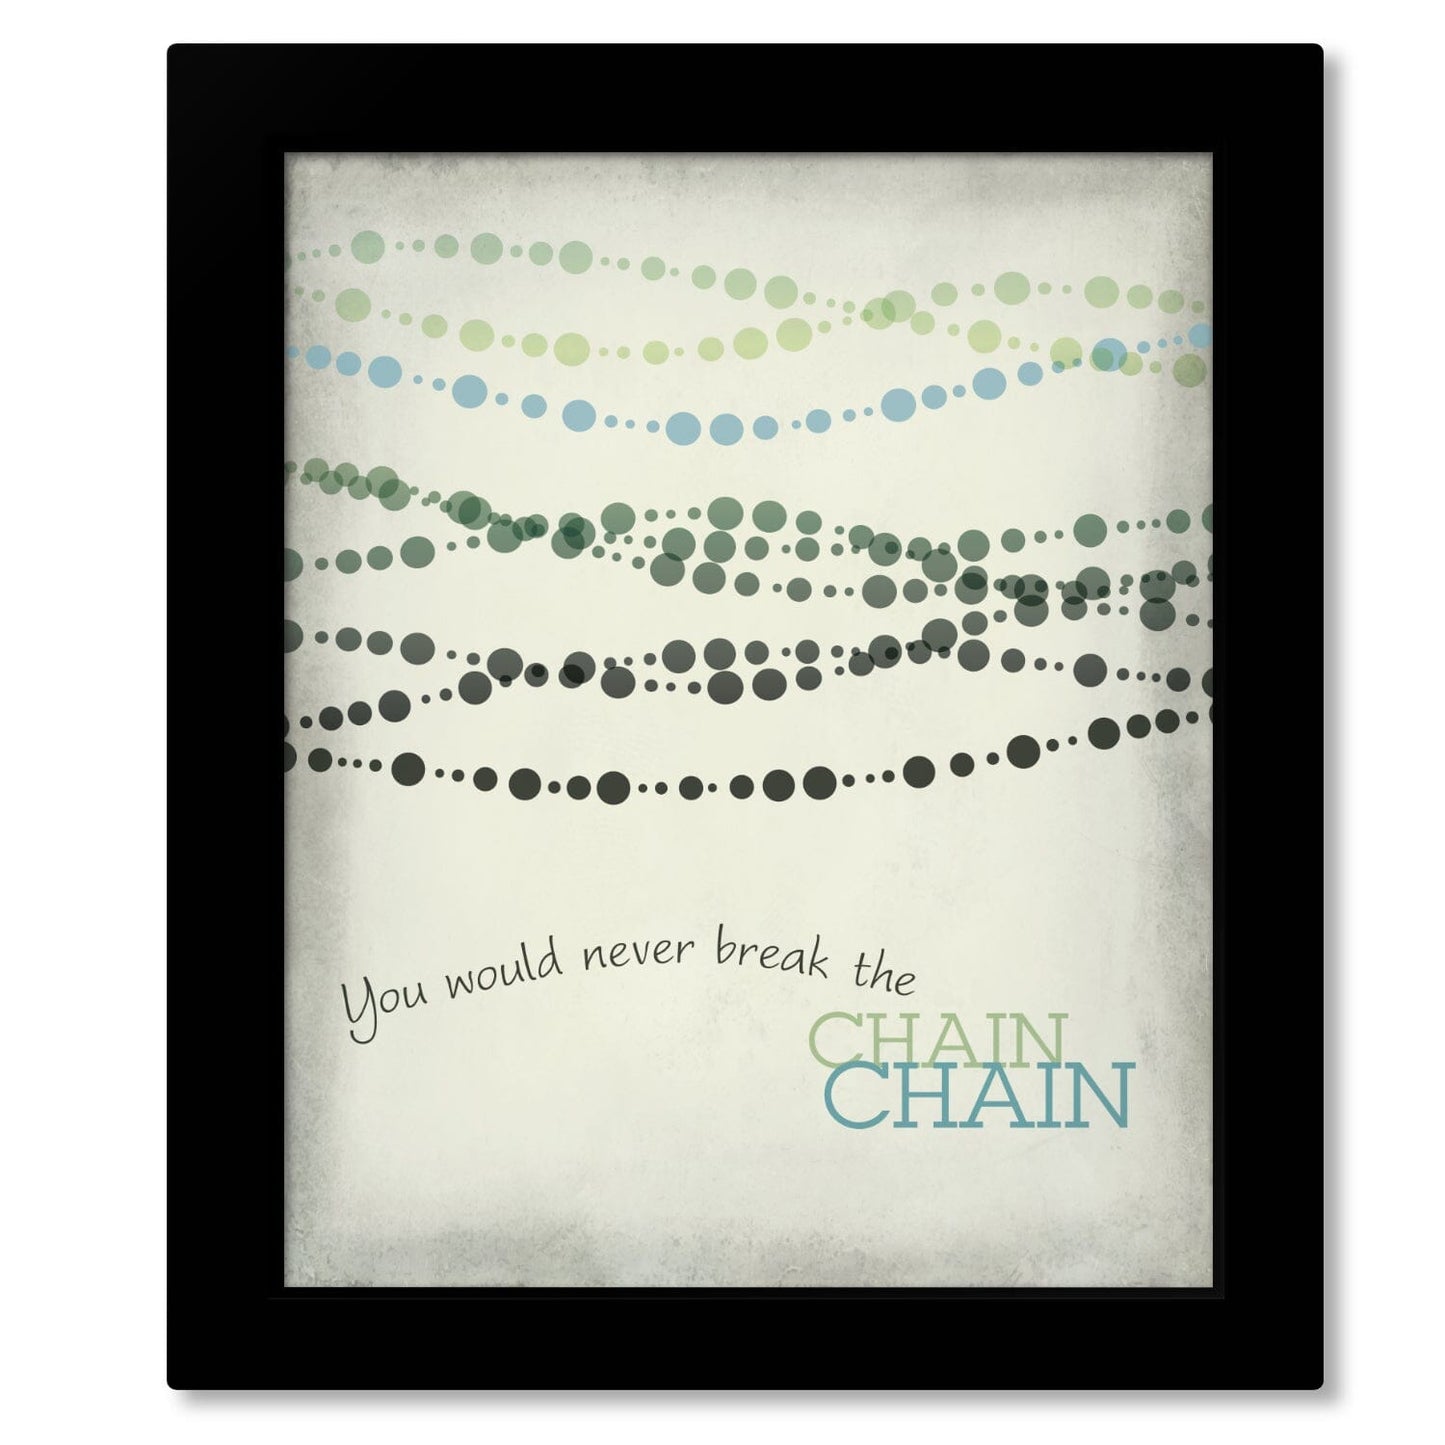 The Chain by Fleetwood Mac - Rock Music Song Lyric Print Song Lyrics Art Song Lyrics Art 8x10 Framed Print (without mat) 